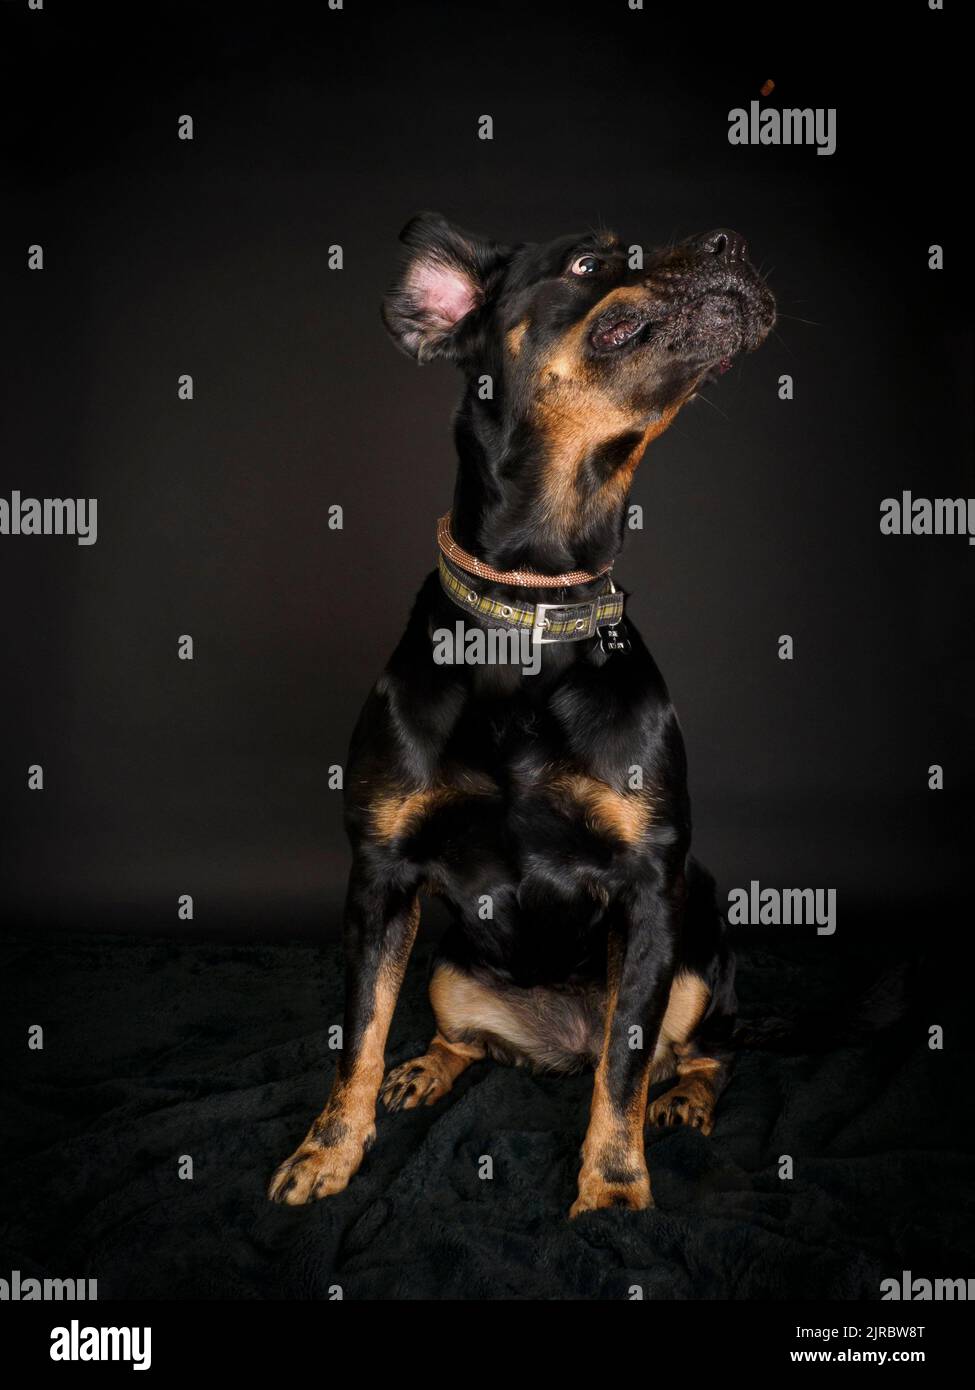 Studio portrait of a Rottweiler catching a treat. Stock Photo